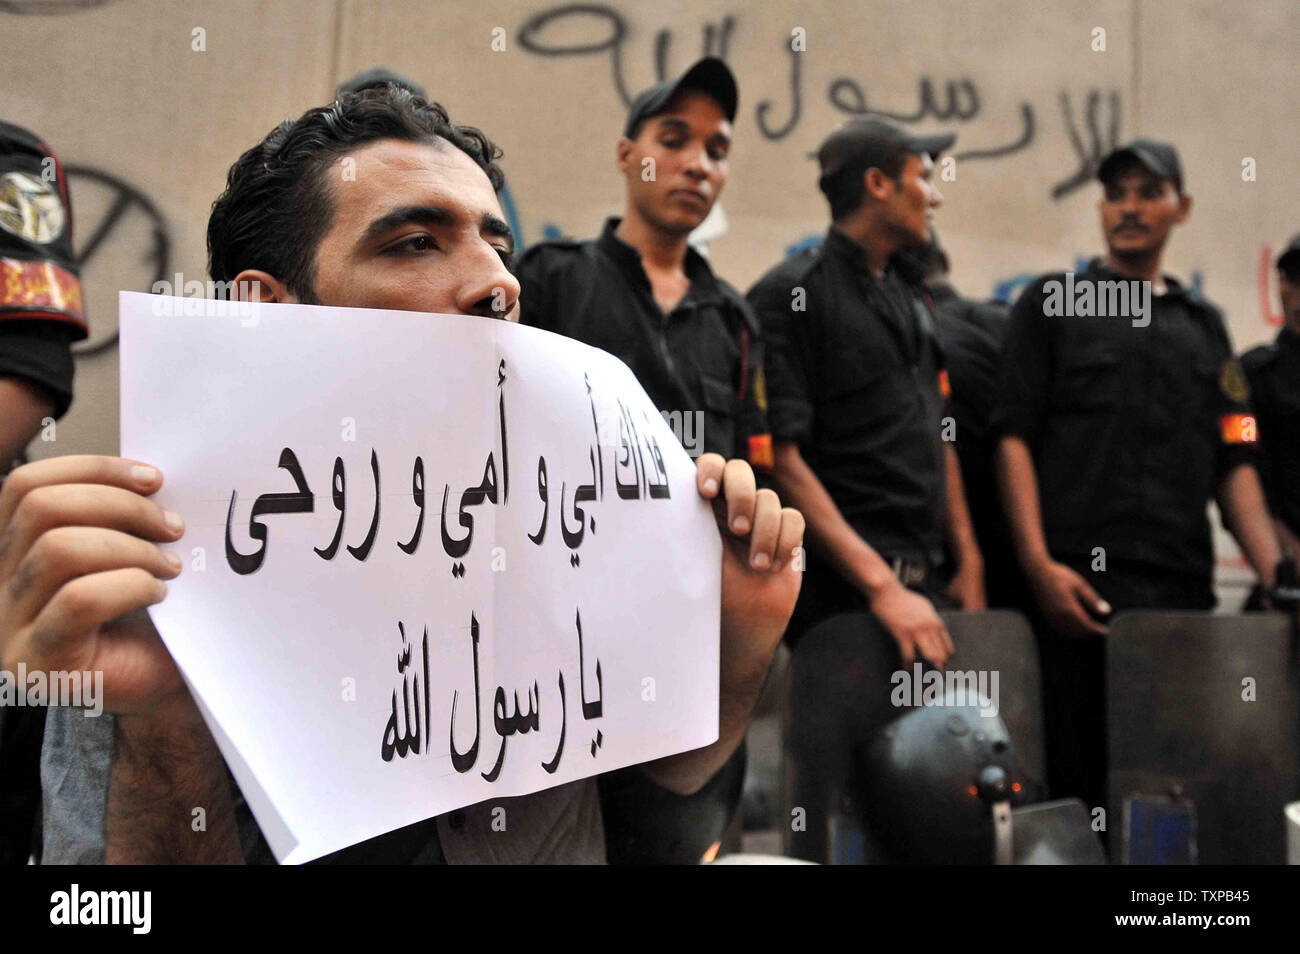 Egyptian protesters hold placards during a demonstration against a film deemed offensive to Islam on September 12, 2012, a demonstration against a film deemed offensive to Islam and the Prophet Mohammad. In Libya, Islamic extremists killed the American ambassador as they stormed the American consulate in Benghazi in anger against the little known film by an amateur American filmmaker. UPI Stock Photo